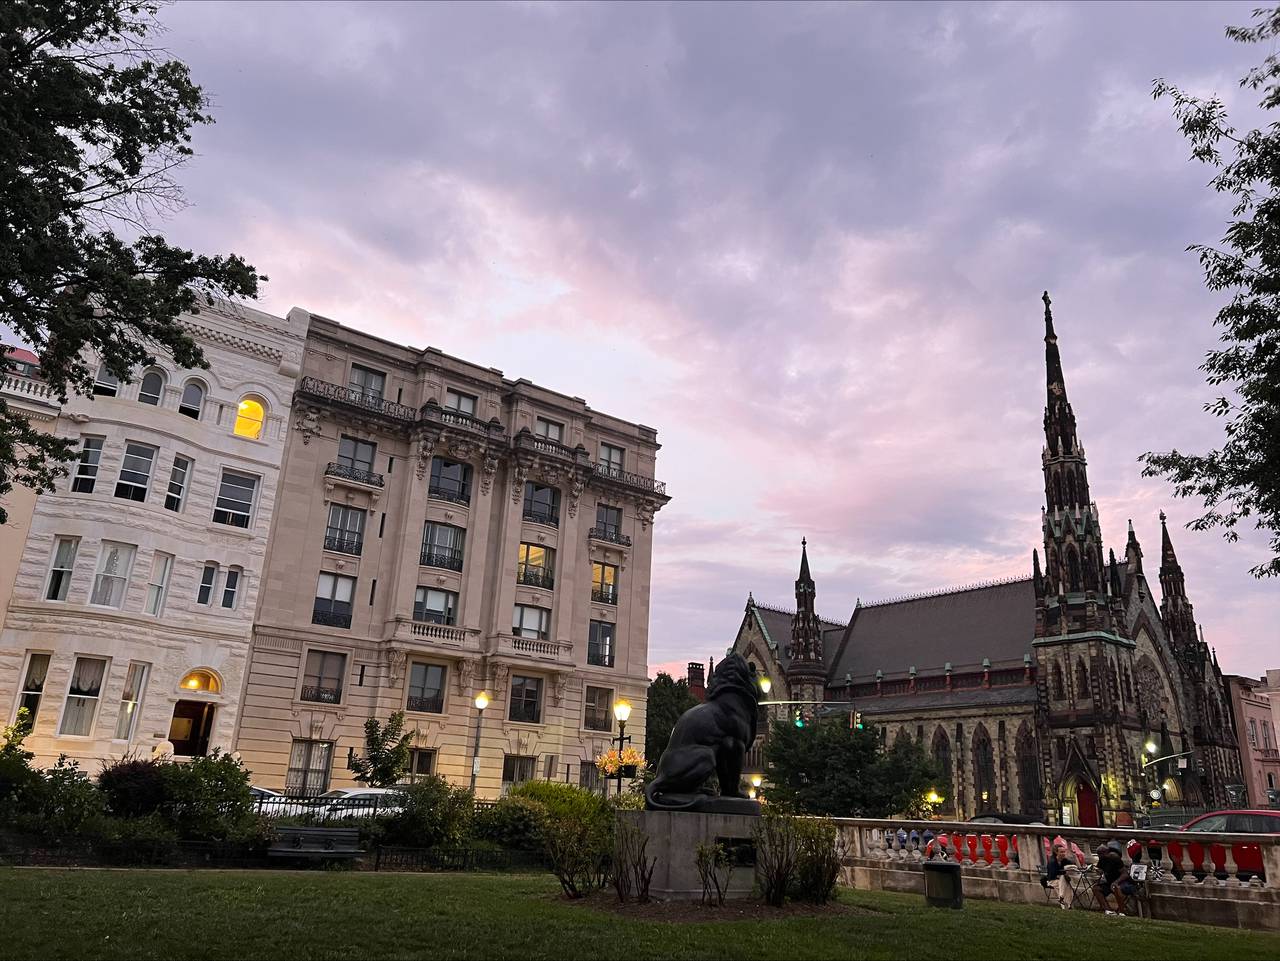 The sky turns purple at dusk behind buildings and a tall church spire.